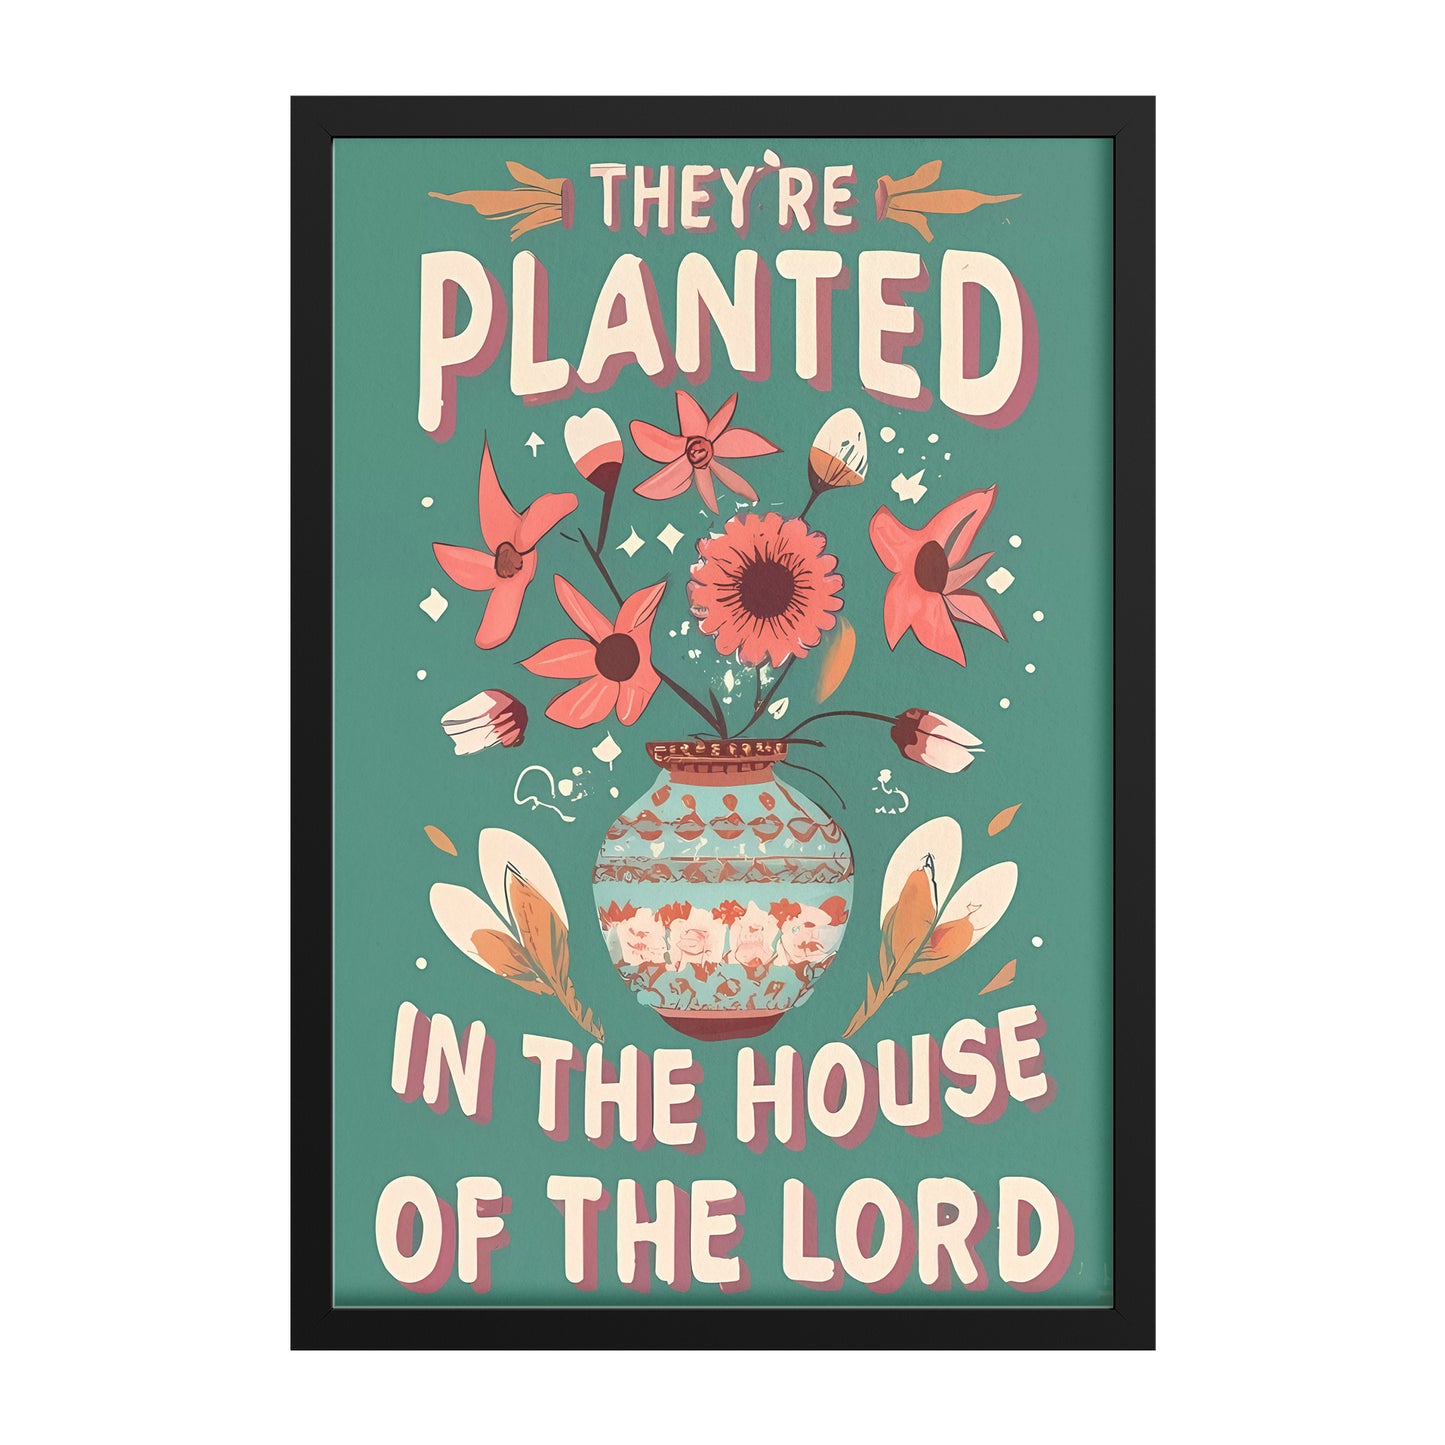 Planted in the House of the Lord Retro Framed Poster